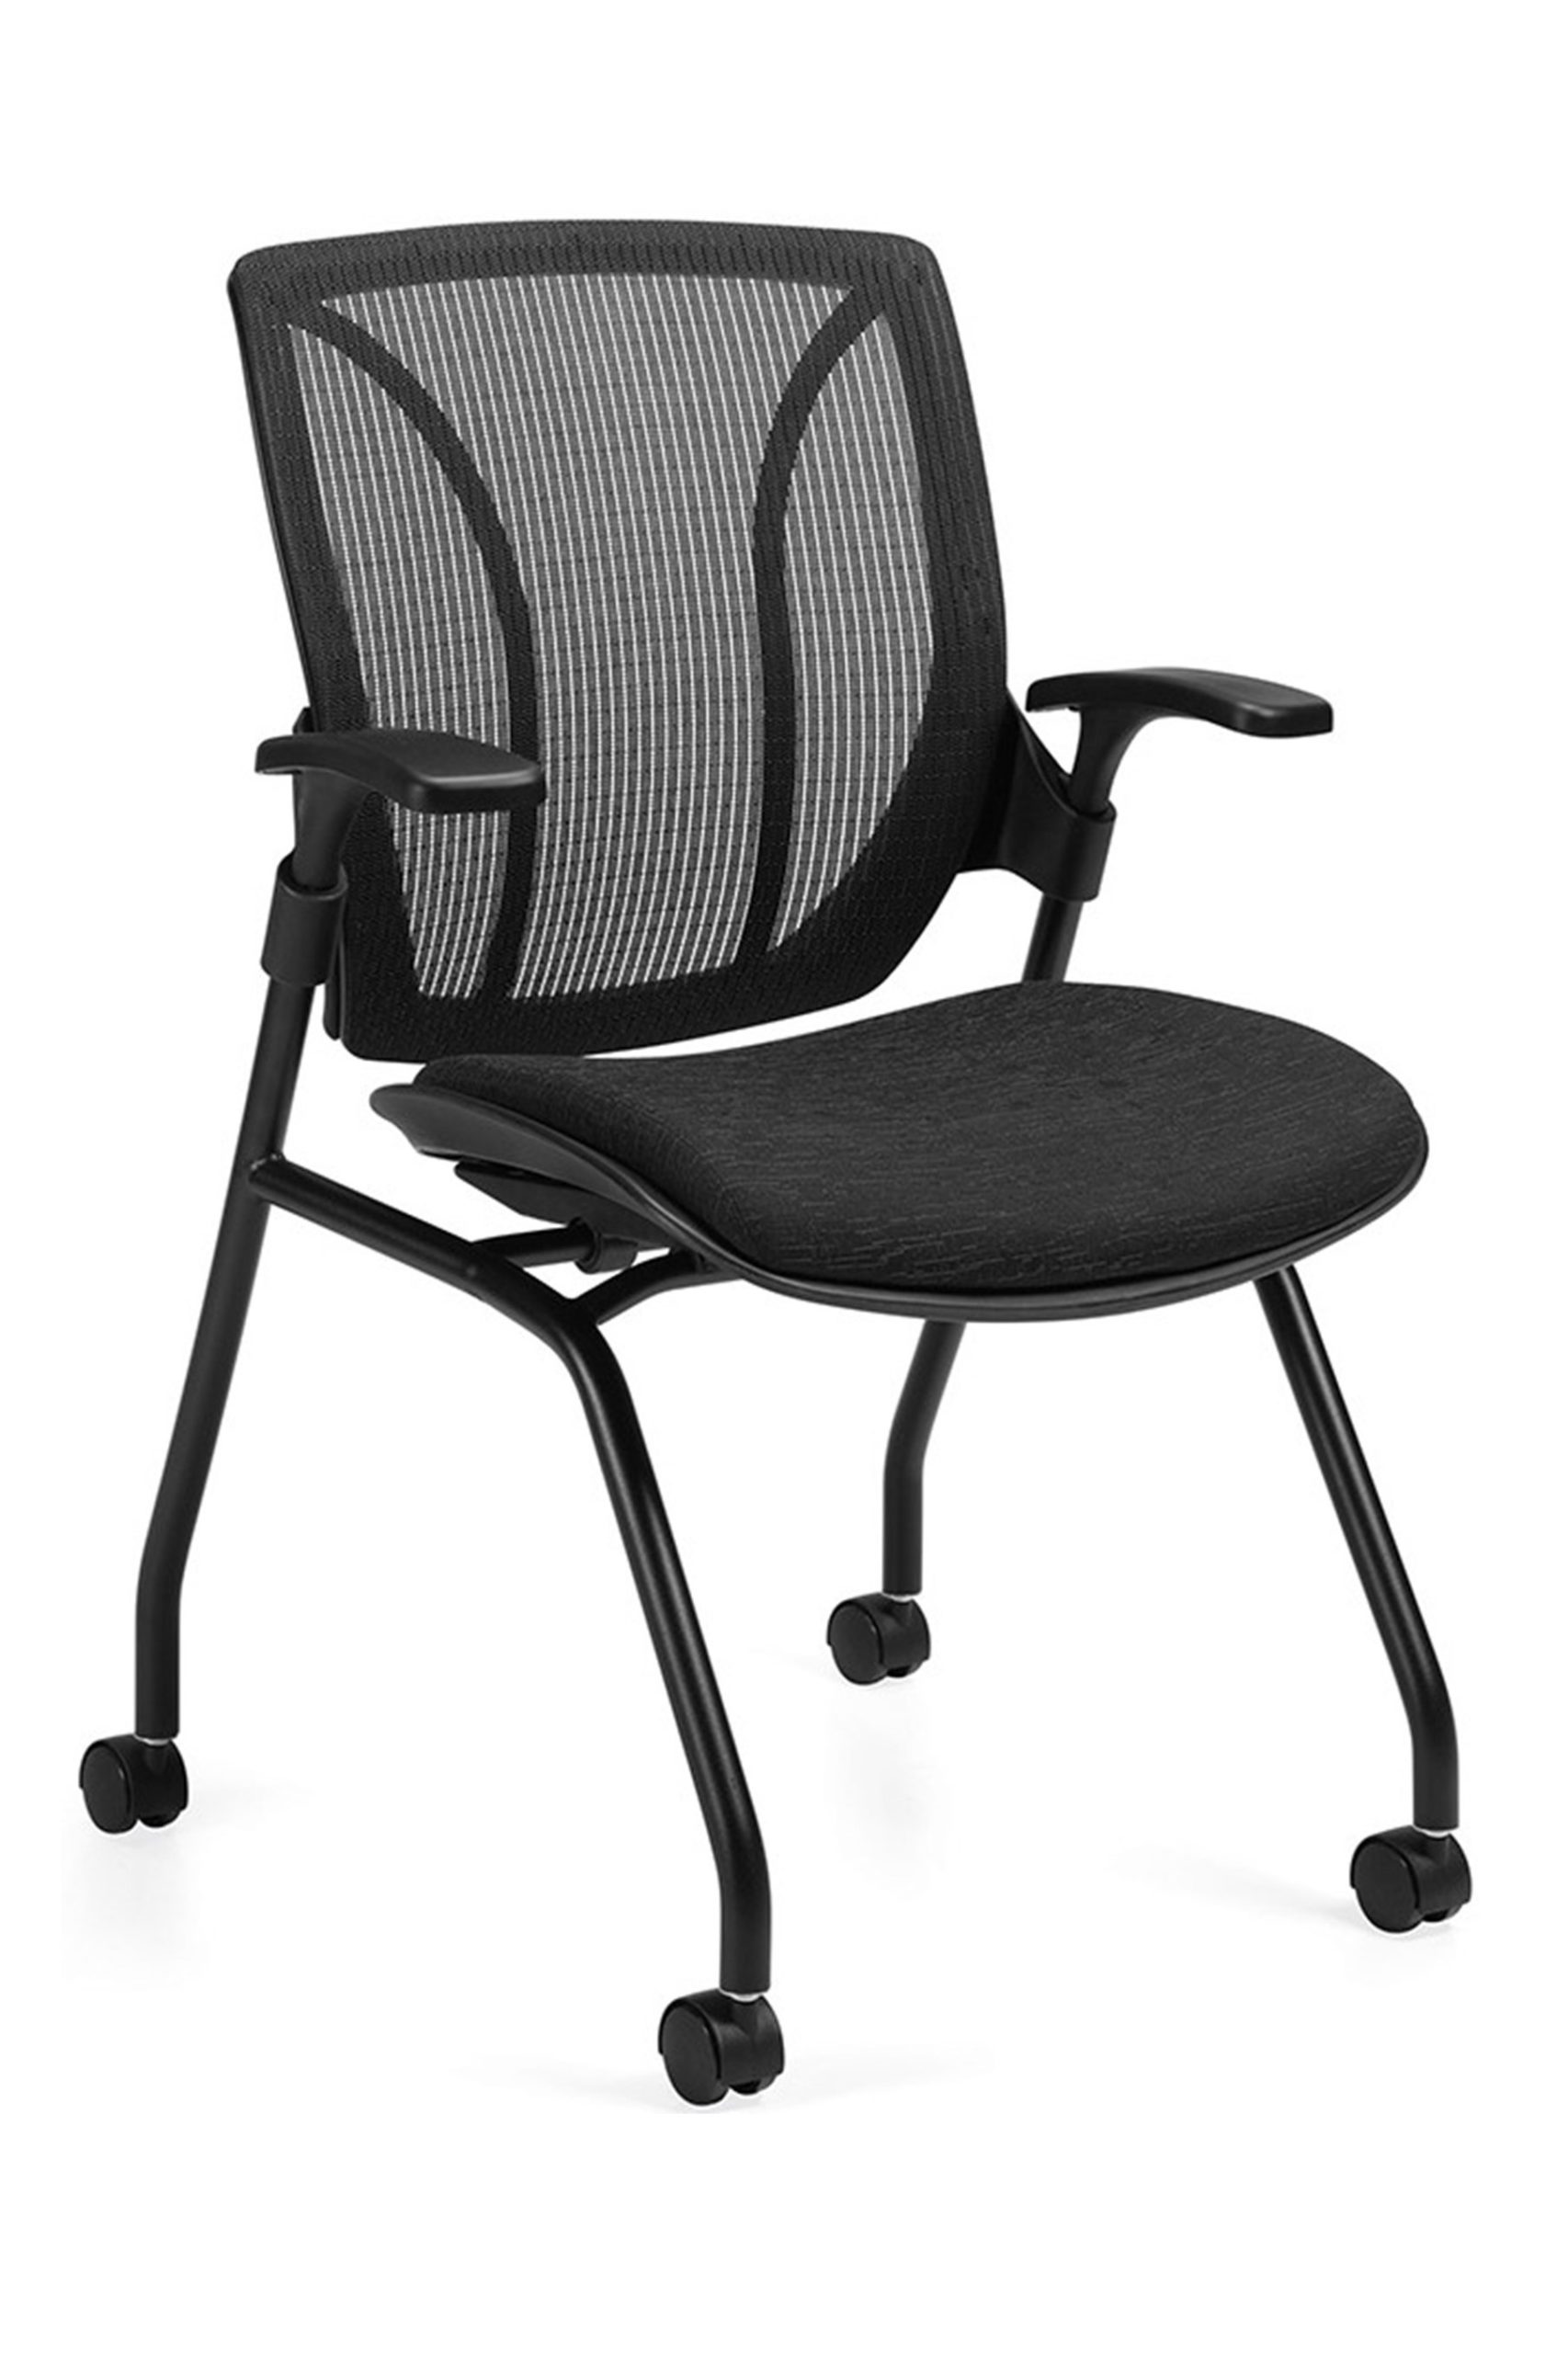 Mesh back guest/training chair in all-black finish including tubular frame, casters, fabric seat, urethane arms, and flip-up seat for horizontal nesting.